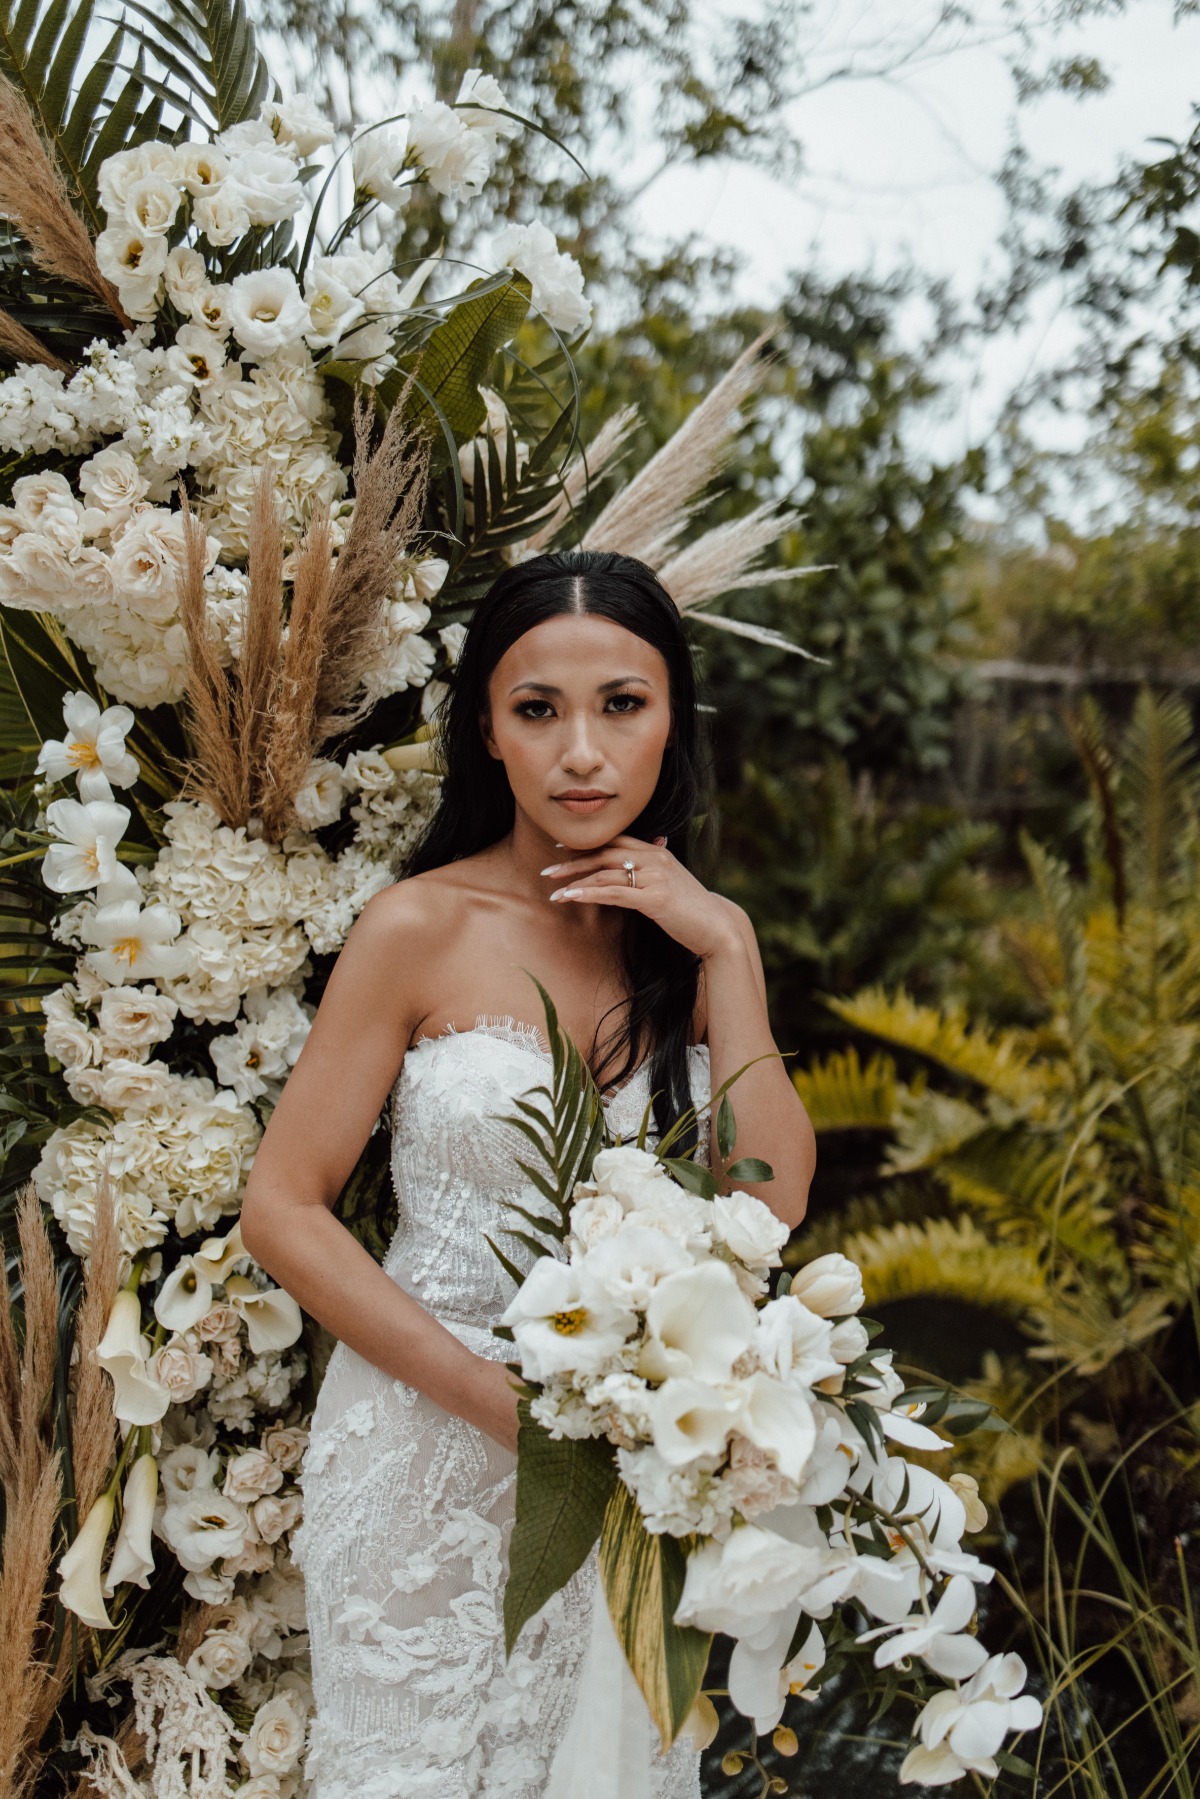 Bridal portrait in front of white flower and tropical foliage installation